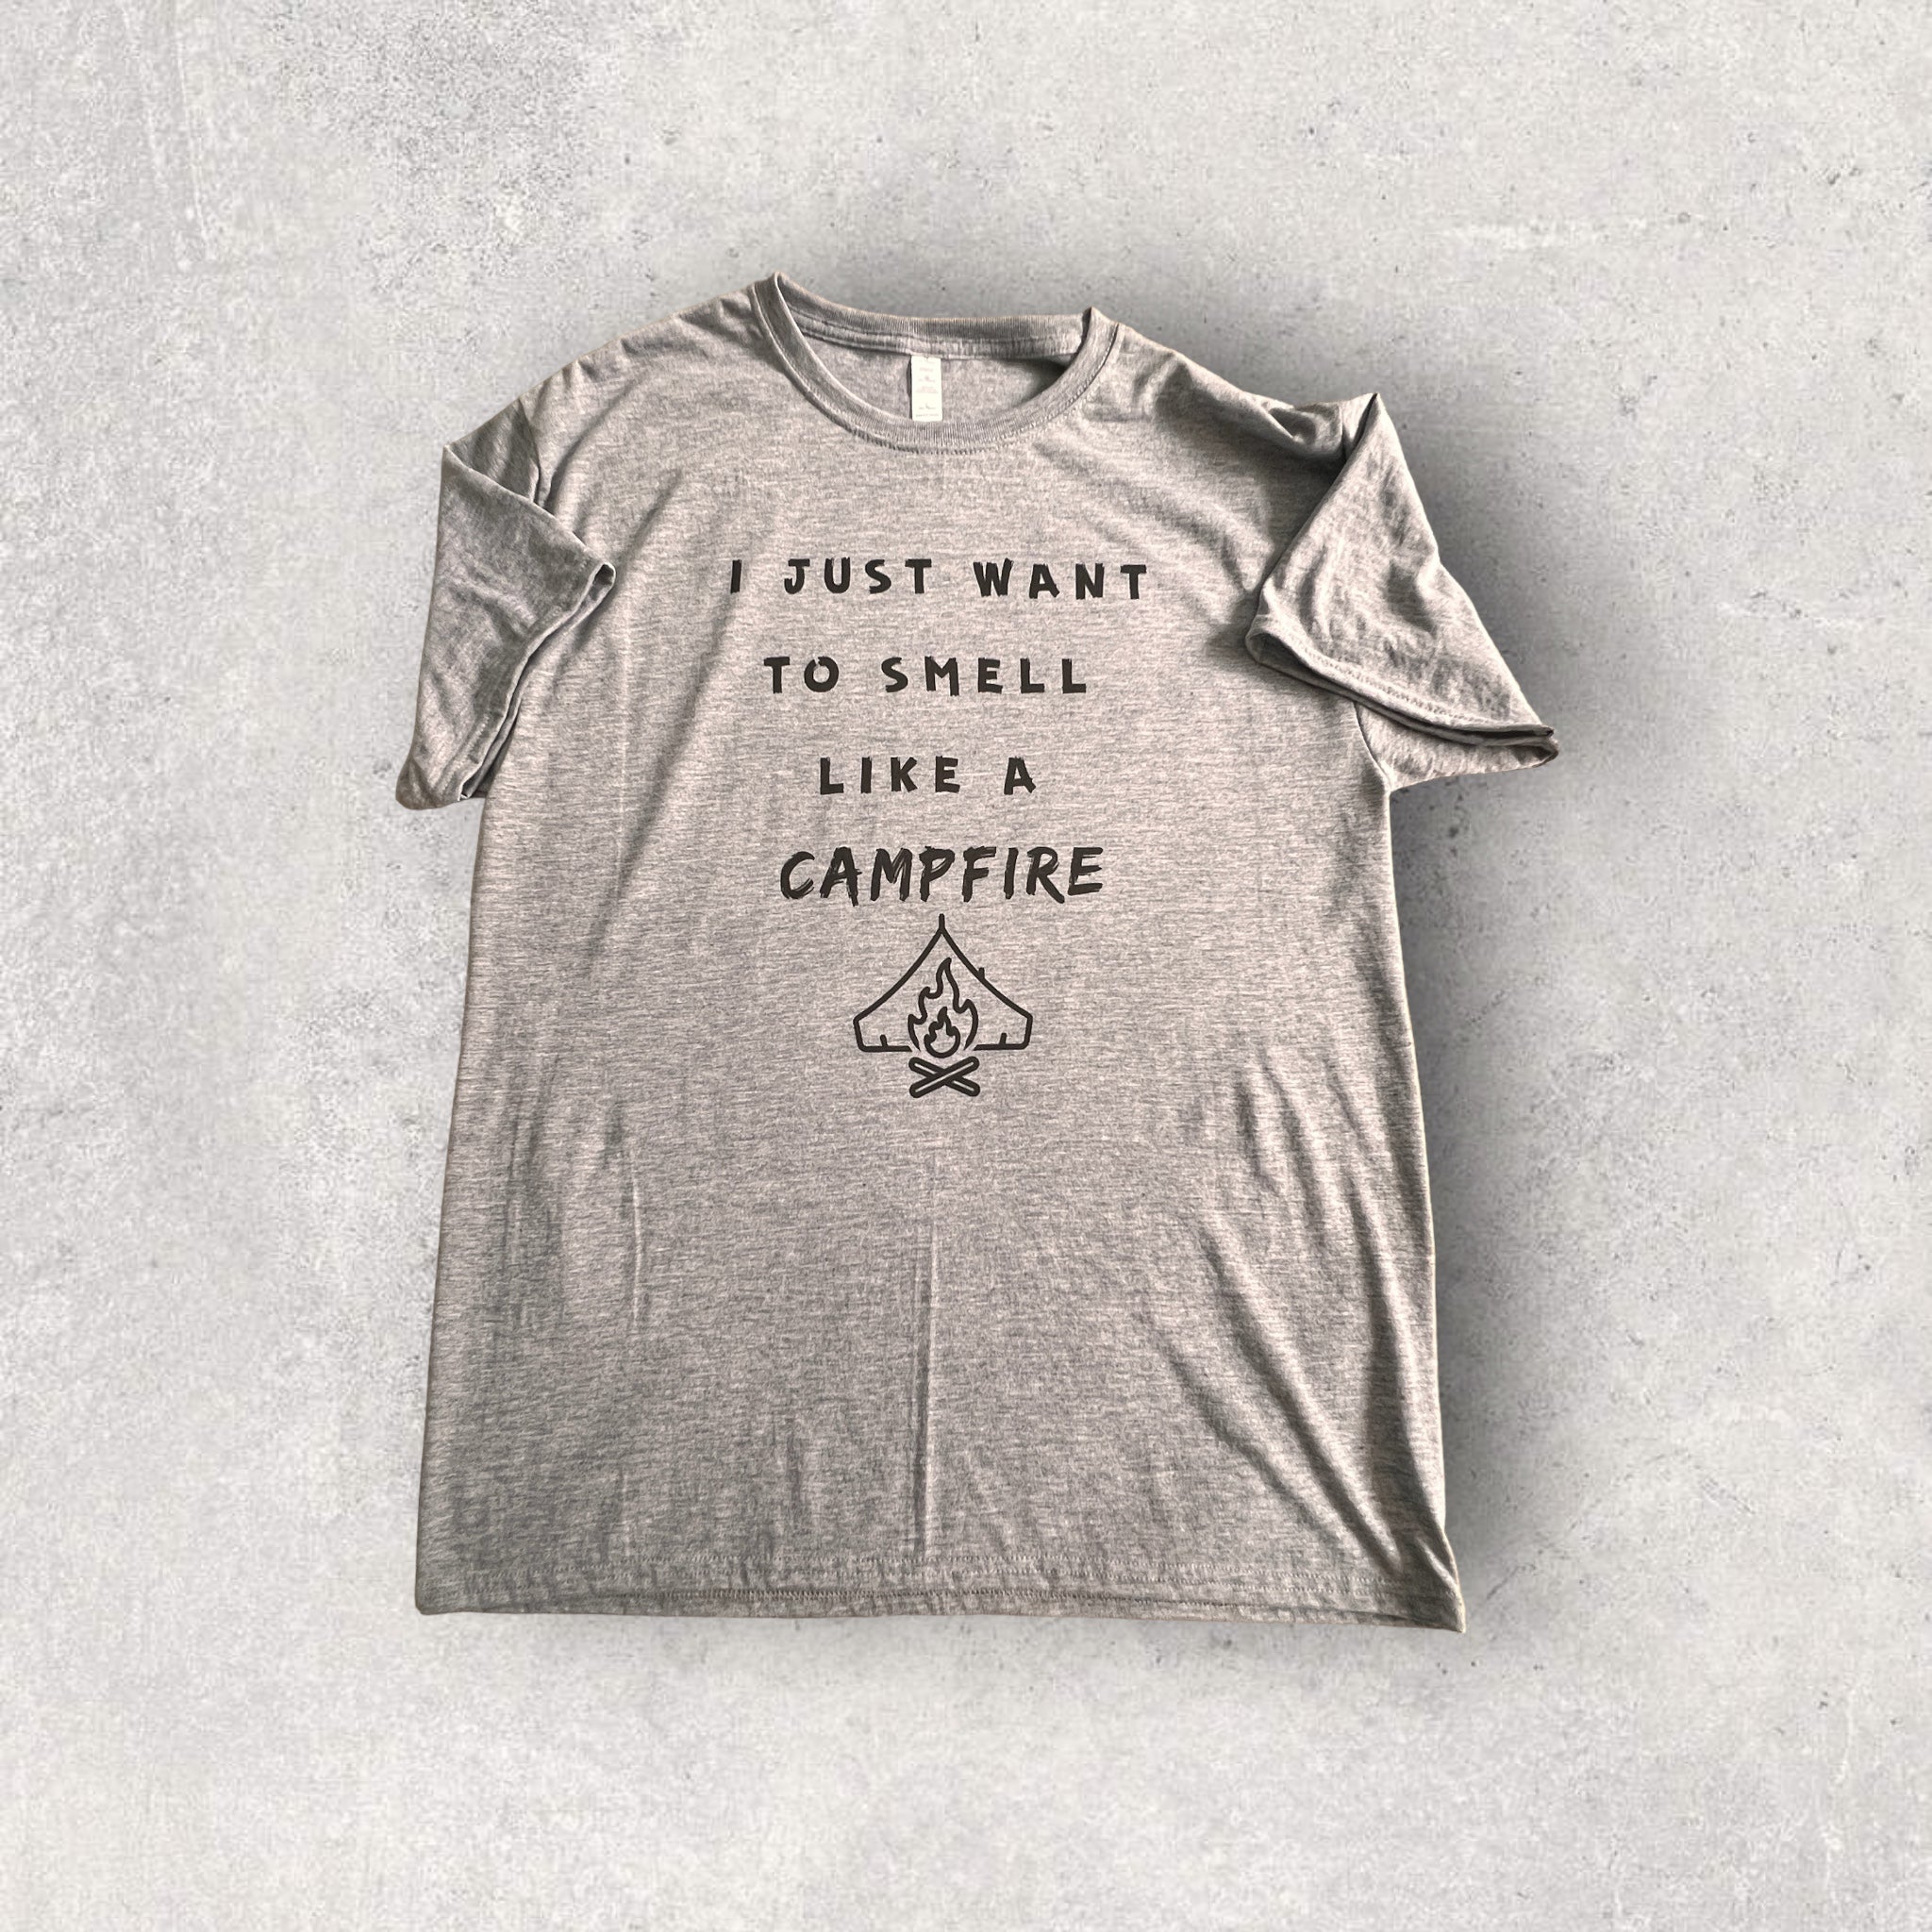 🔥🌲 "I Just Want to Smell Like a Campfire" Performance T-Shirt 🏕️🌟 - Size Large